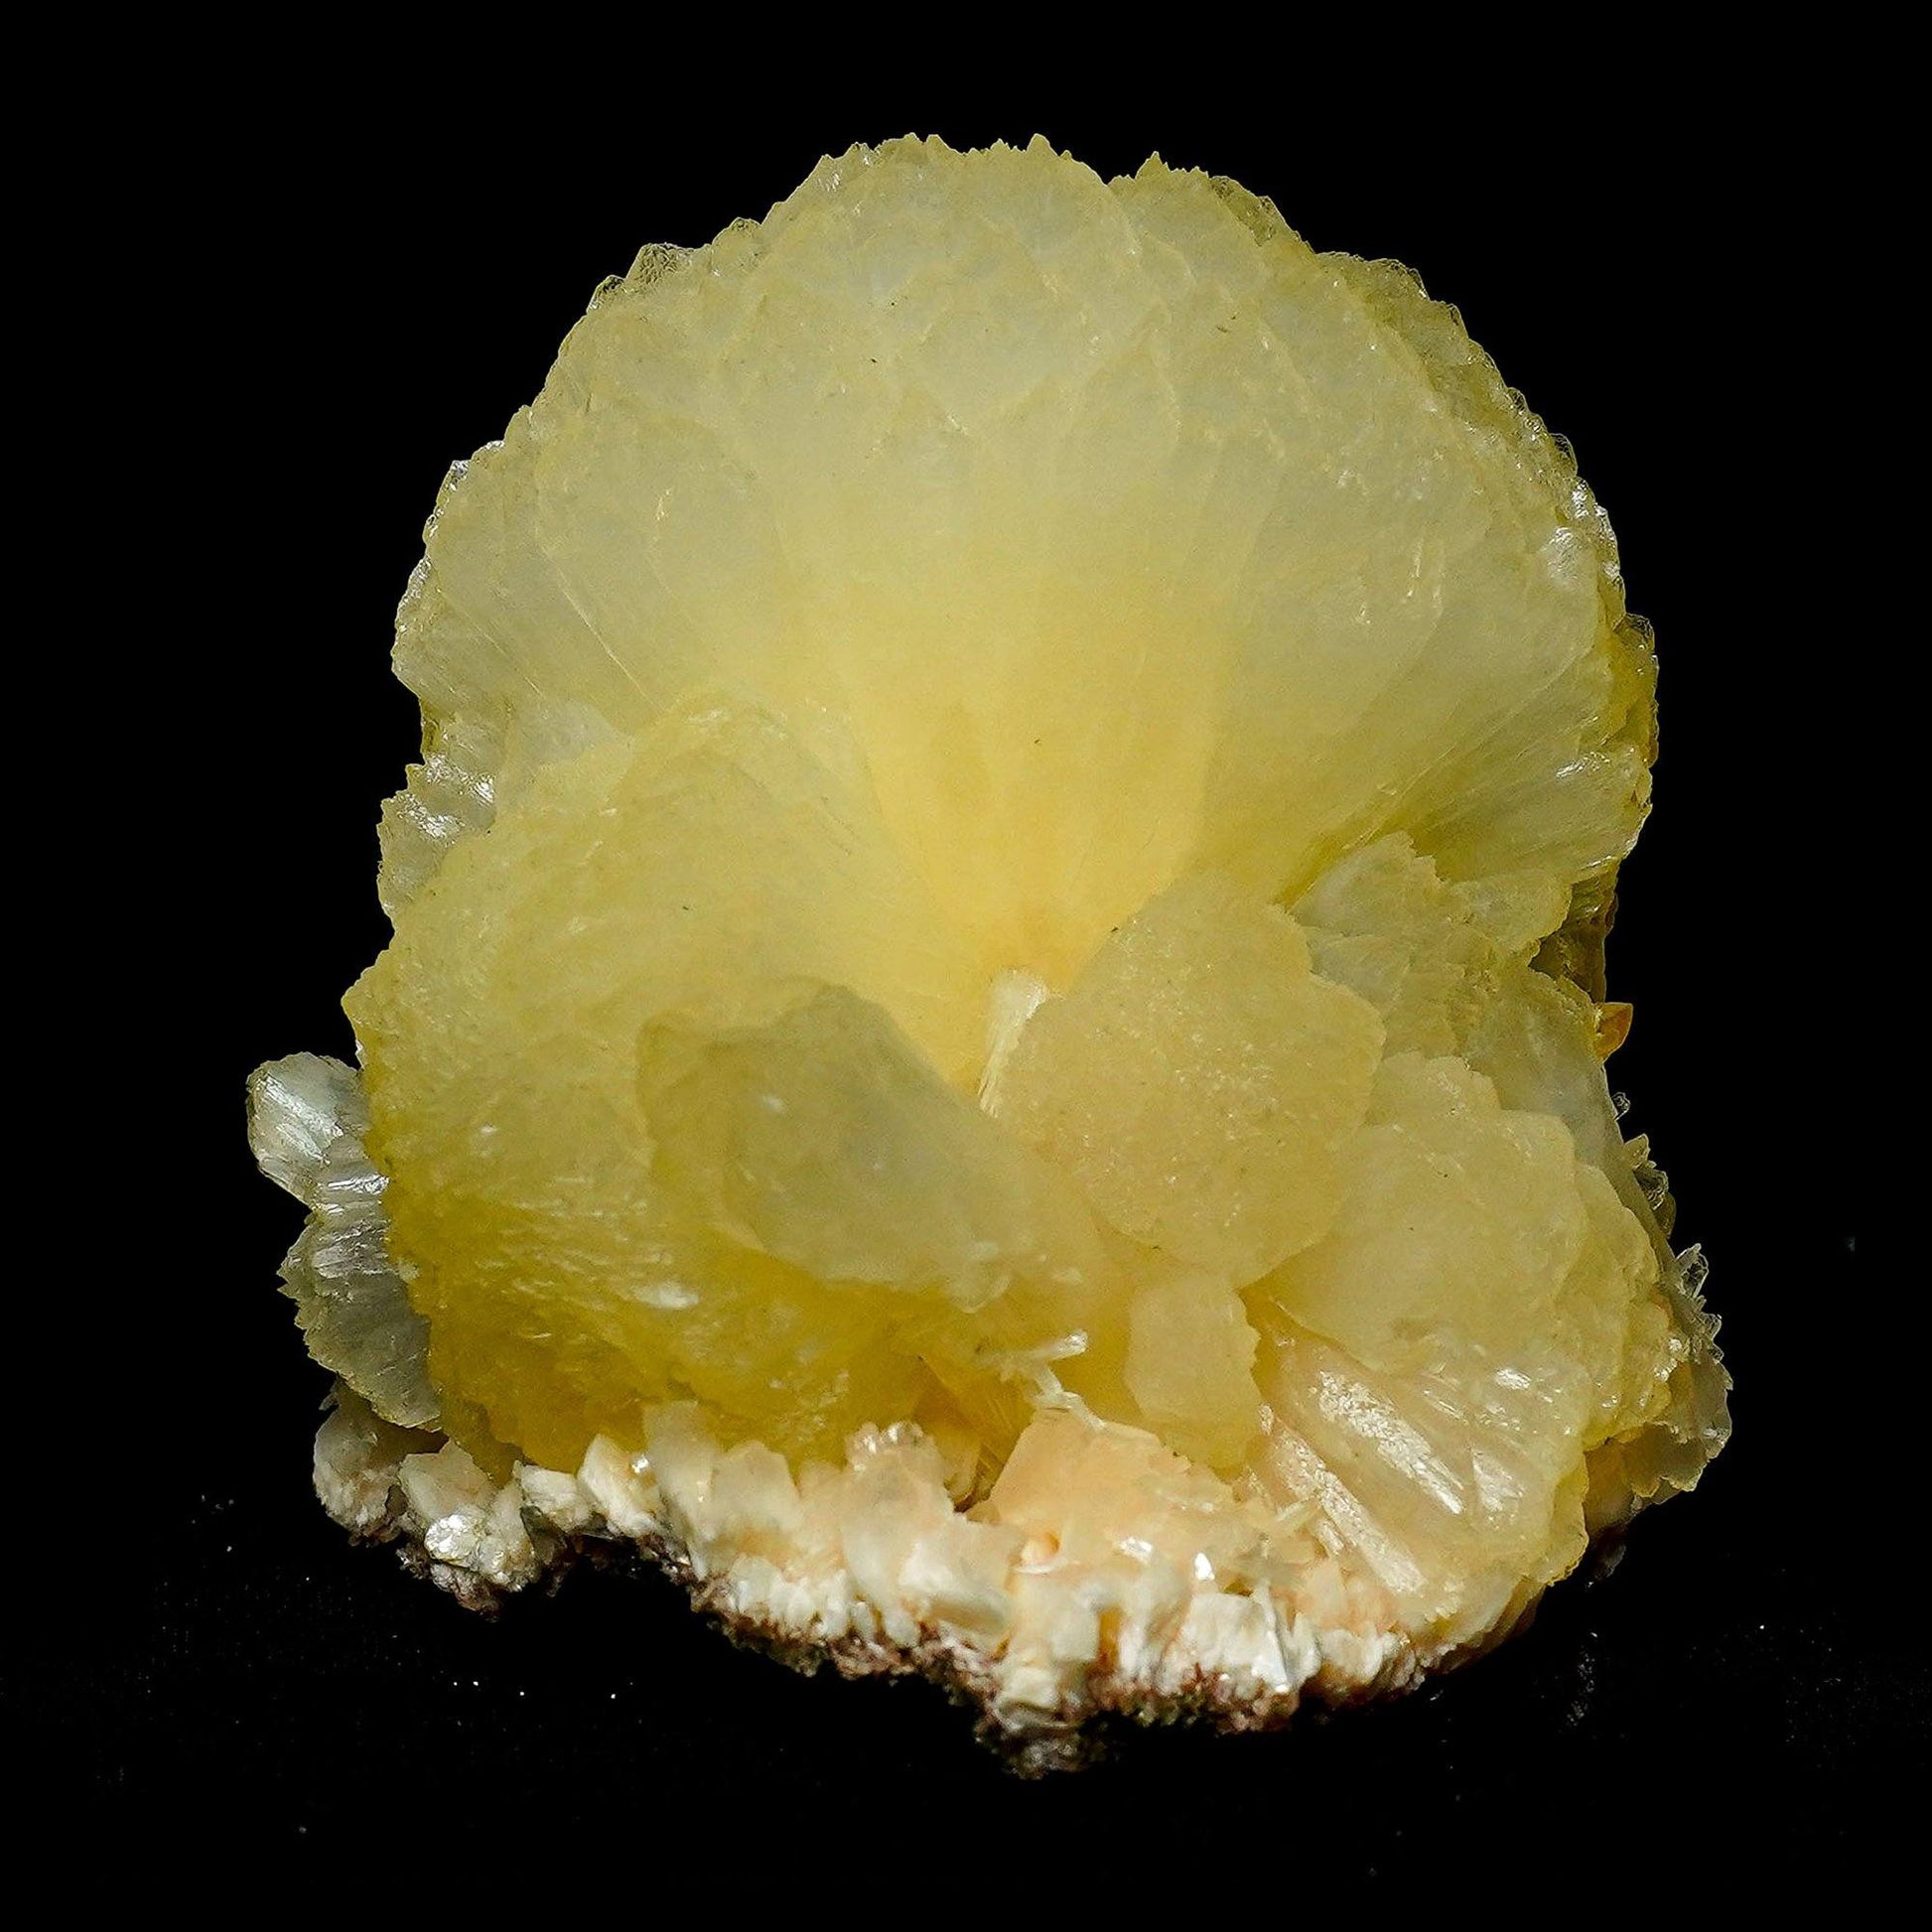 Stilbite Bow Tie Formation Natural Mineral Specimen # B 4928  https://www.superbminerals.us/products/stilbite-bow-tie-formation-natural-mineral-specimen-b-4928  Features: Decoratively embedded in the Chalcedony basalt matrix is a beautiful, big double terminated stilbite bowtie with excellent broad form and fantastic broad termination. Stilbite is a highly glossy, translucent, cream-colored mineral that is beautifully enhanced by the numerous brilliant crystals